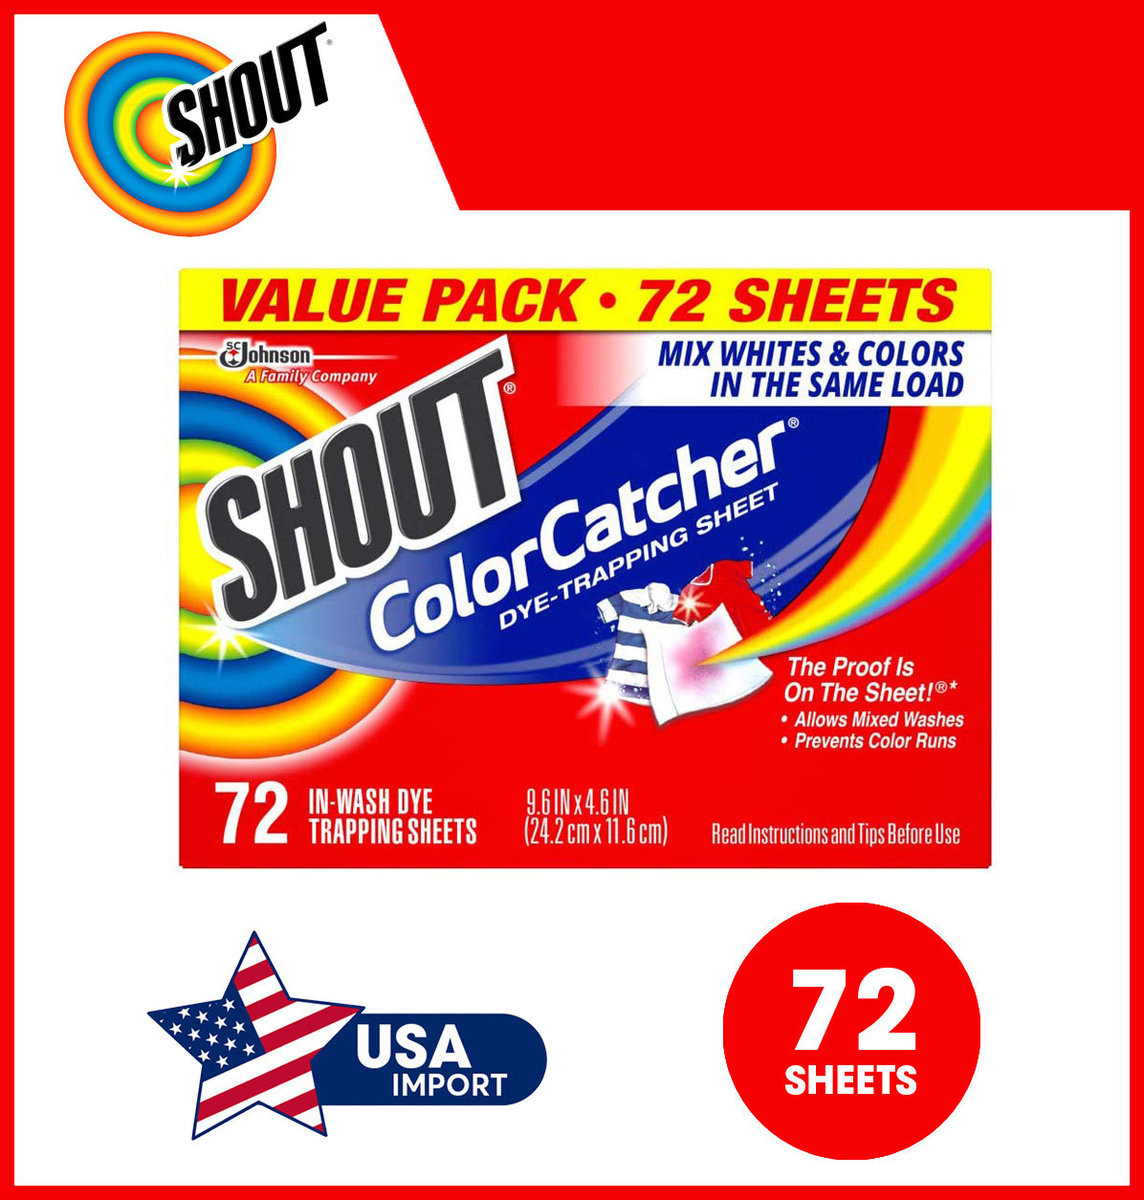 Shout Color Catcher Sheets For Laundry Dye Trapping Sheets 72 Count 